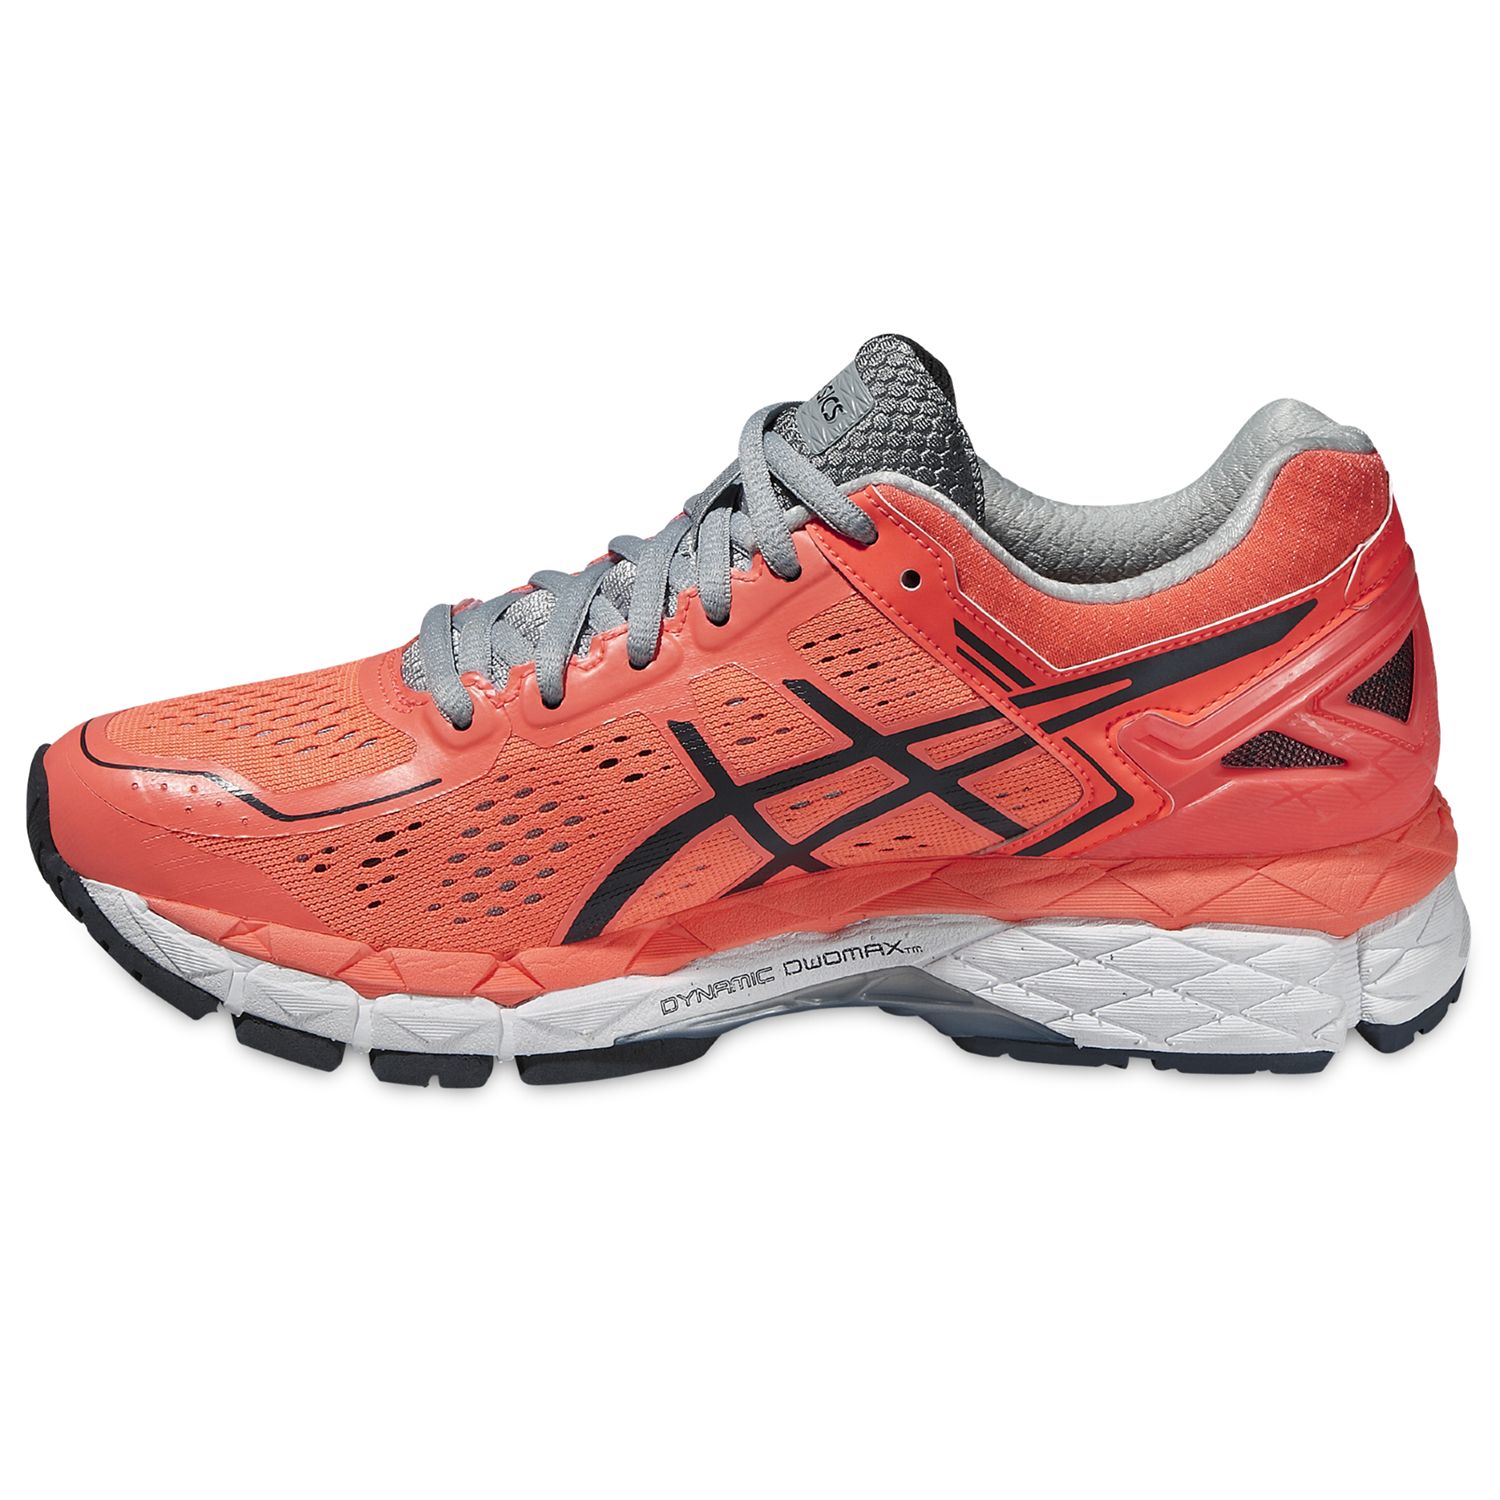 Asics GEL-Kayano 22 Women's Structured Running Shoes, Flash Coral